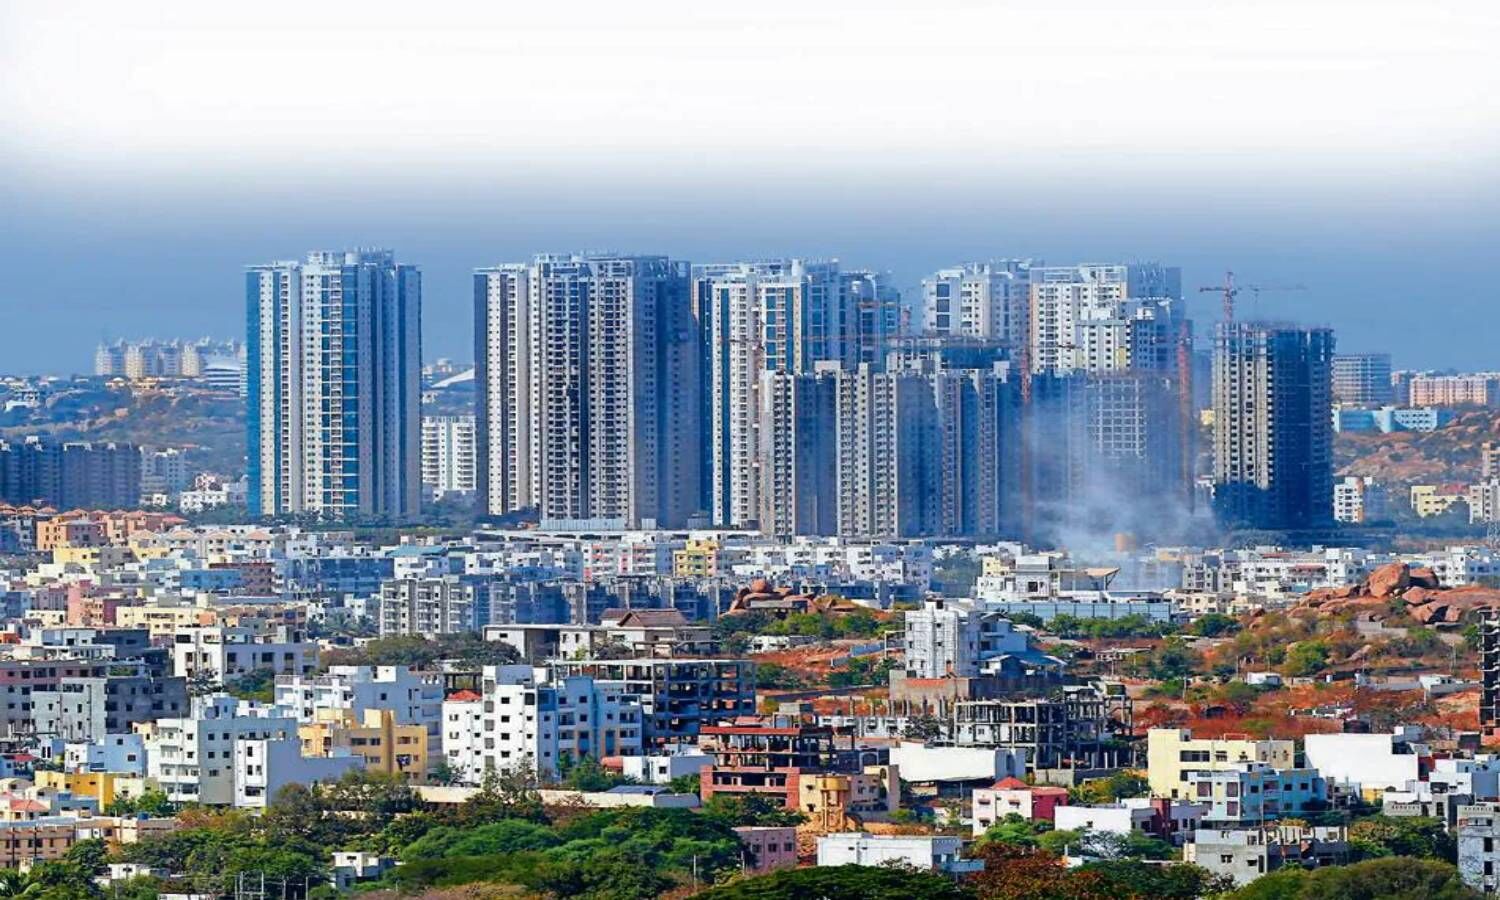 Hyderabad Reports Property Registrations Worth Rs 12,000 Crore in Jan-April